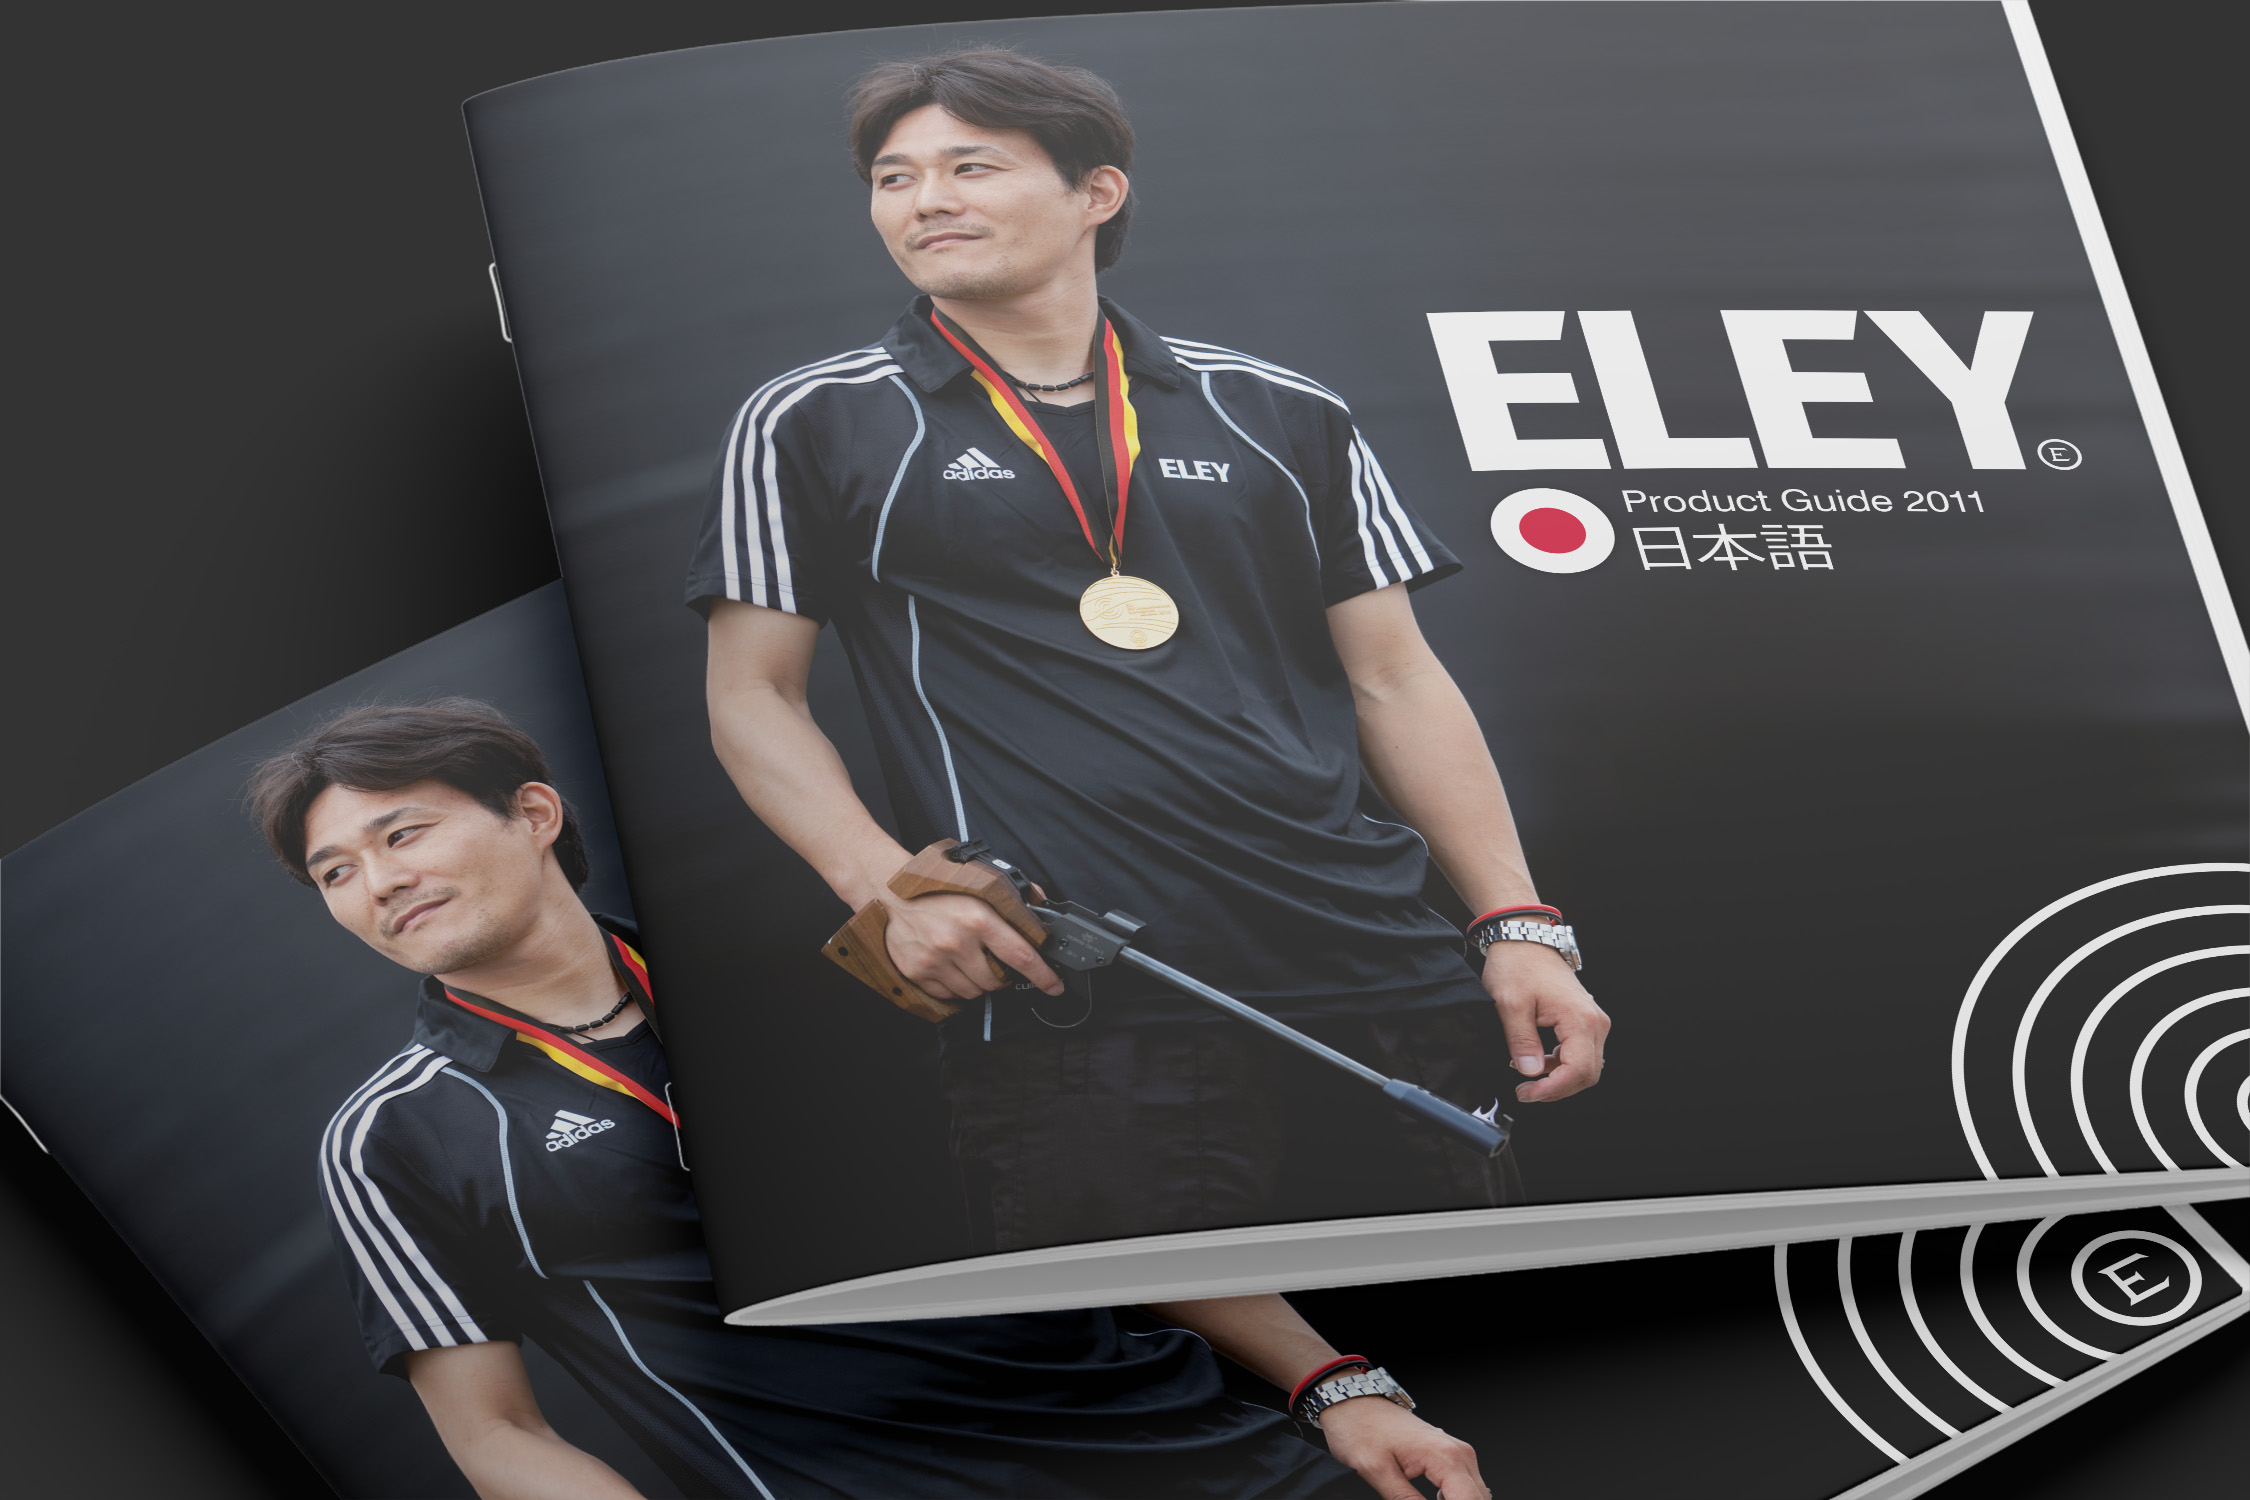 Close-cropped image showing the Japanese-language Eley 2011 product guides. On the cover a Japanese competetive shooter wearing a gold medal holds a pistol and looks to his right against a dark background.